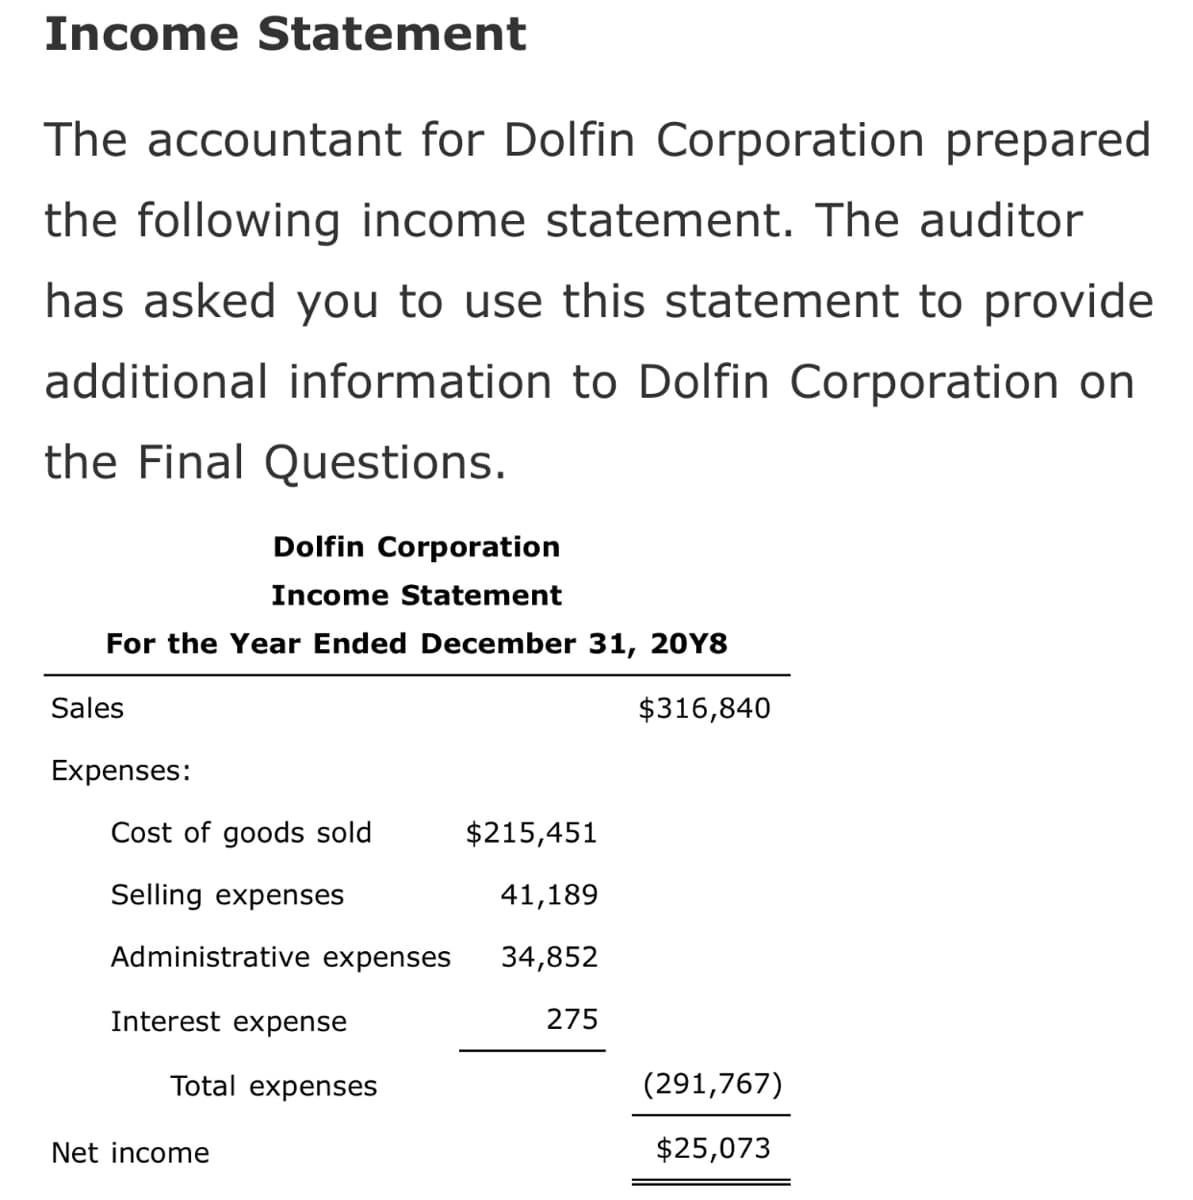 Income Statement
The accountant for Dolfin Corporation prepared
the following income statement. The auditor
has asked you to use this statement to provide
additional information to Dolfin Corporation on
the Final Questions.
Dolfin Corporation
Income Statement
For the Year Ended December 31, 20Y8
Sales
$316,840
Expenses:
Cost of goods sold
$215,451
Selling expenses
41,189
Administrative expenses
34,852
Interest expense
275
Total expenses
(291,767)
Net income
$25,073
